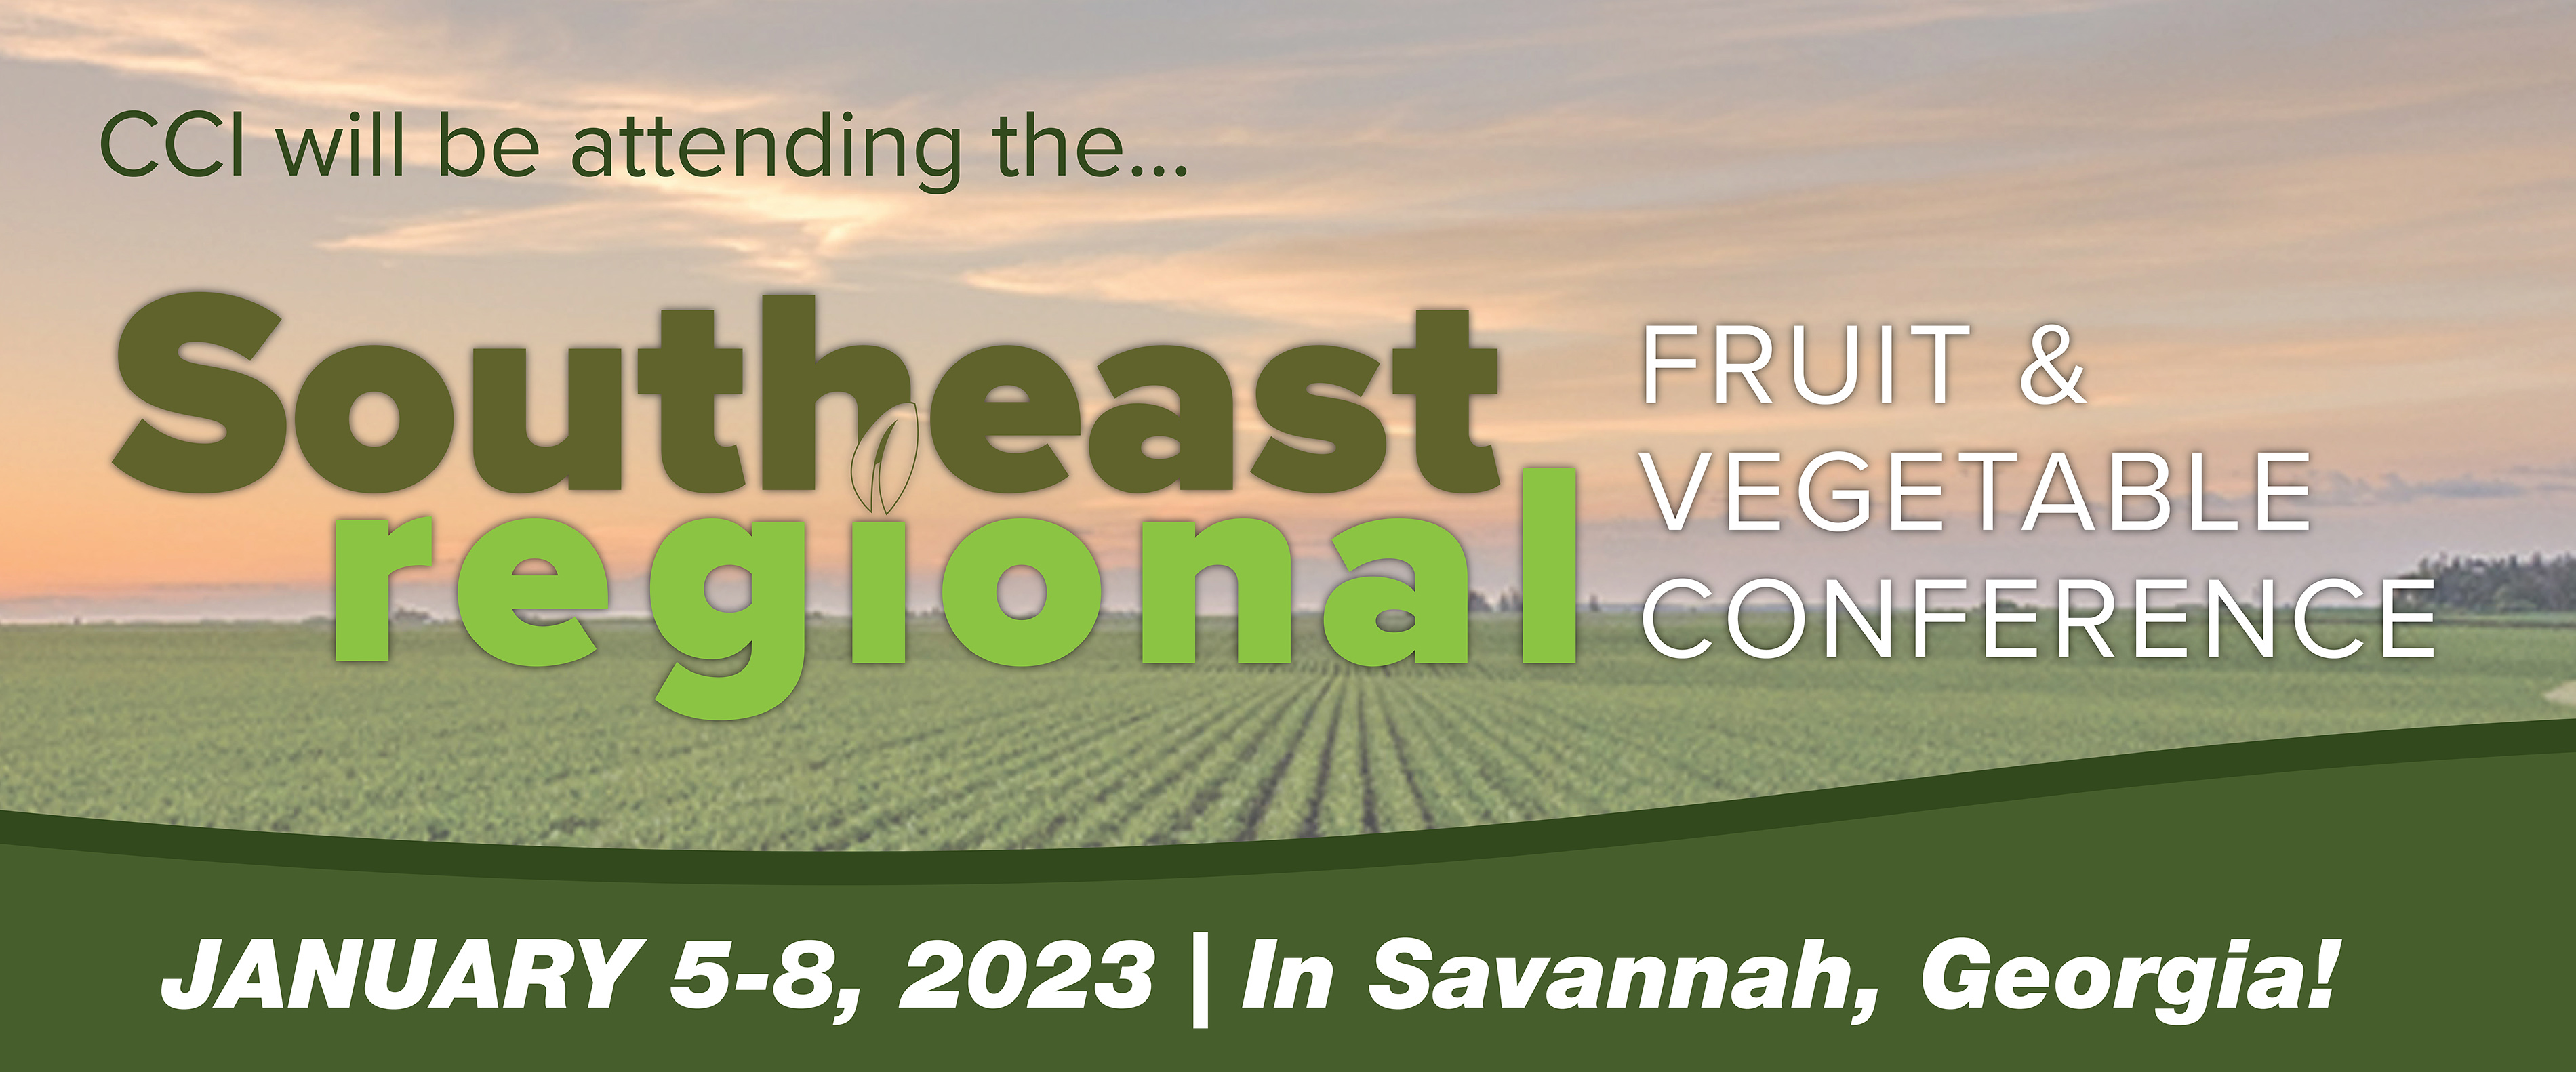 Southeast Fruit and Vegetable Expo 2023 Banner